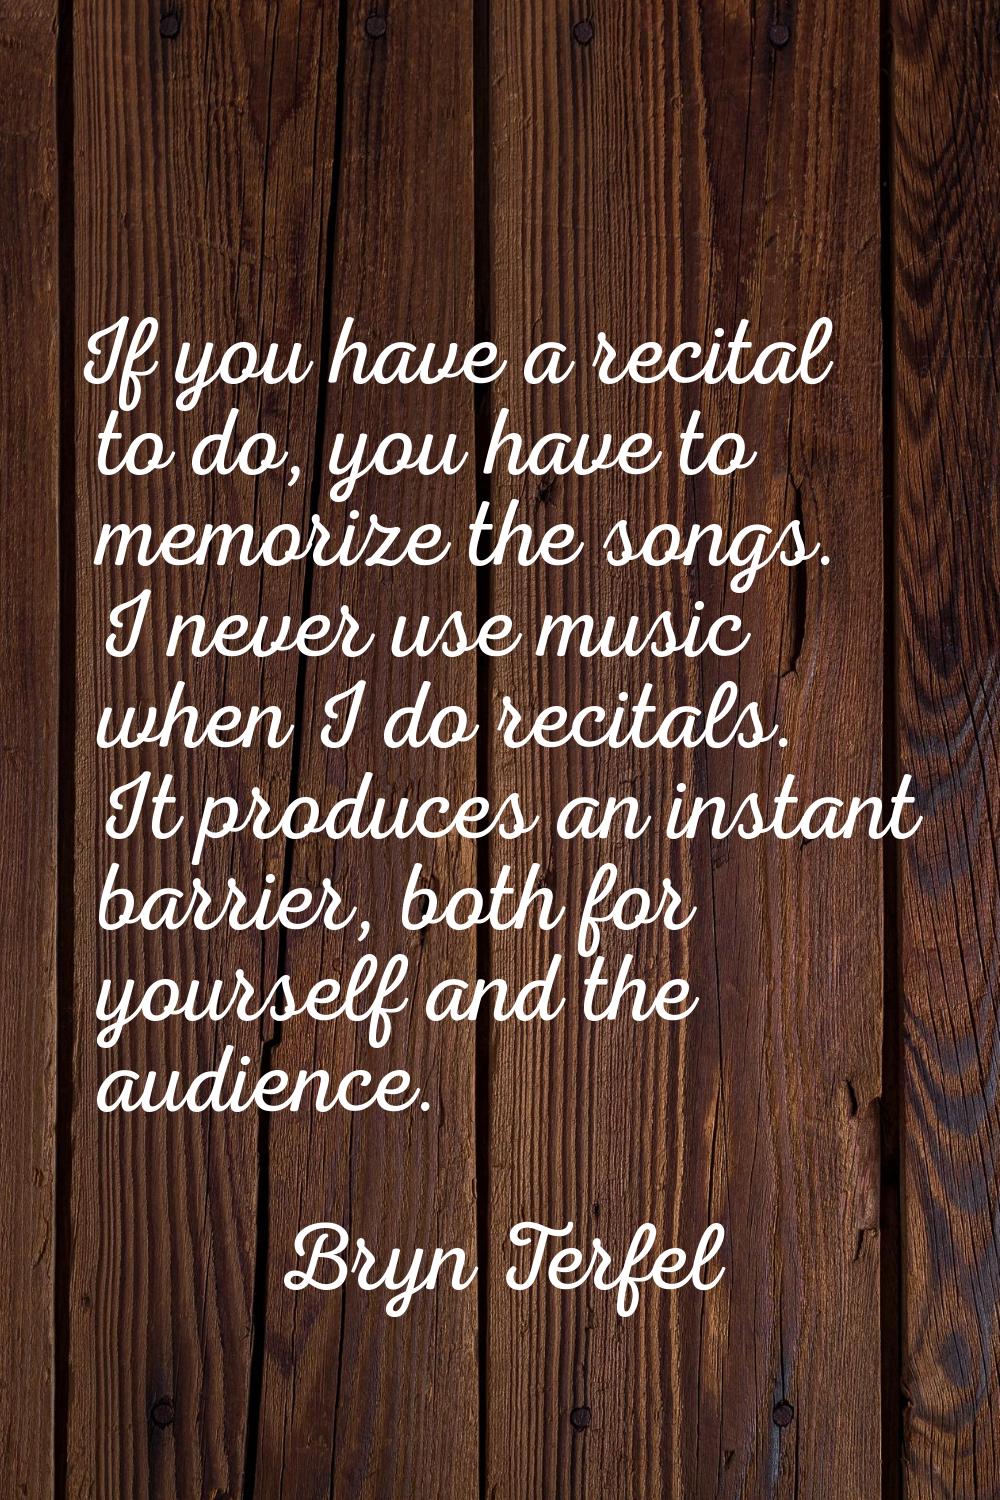 If you have a recital to do, you have to memorize the songs. I never use music when I do recitals. 